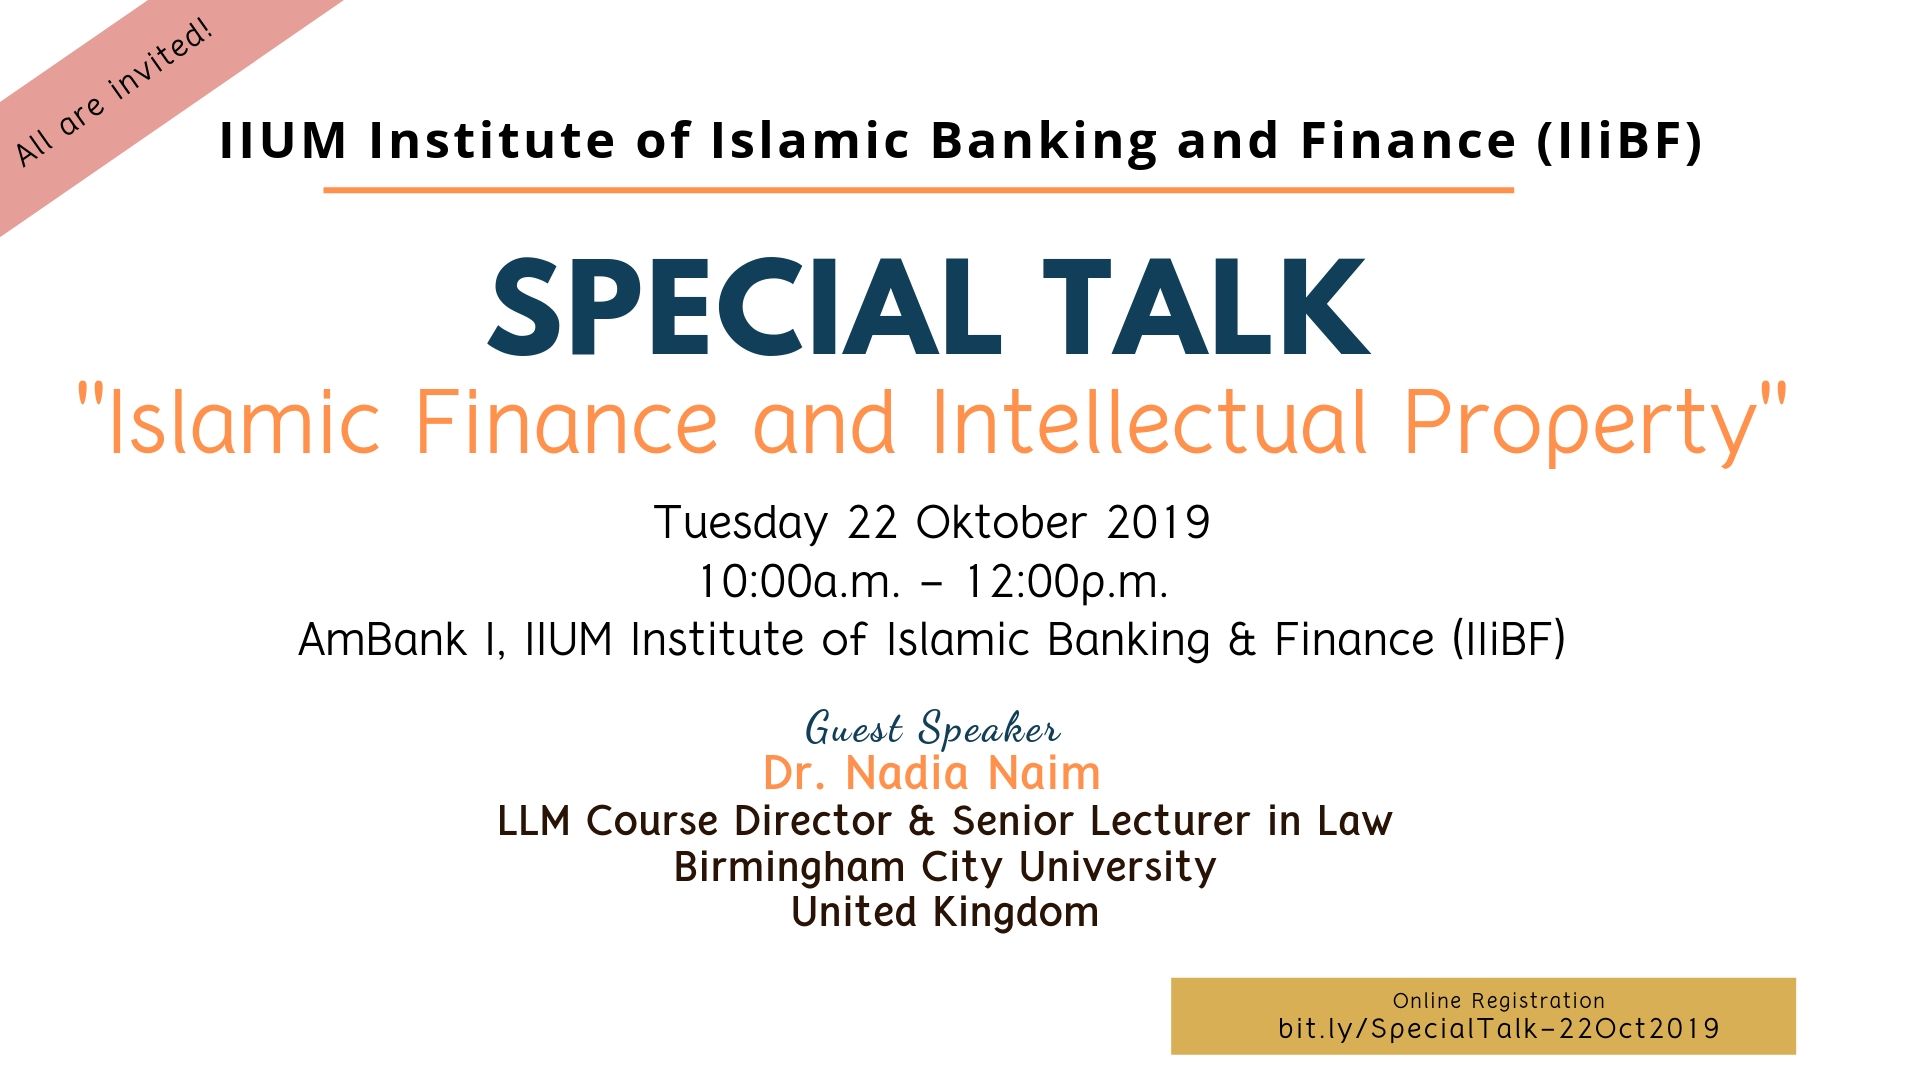 Special Talk Series 2019 - Dr. Nadia Naim :-  "Islamic Finance and Intellectual Property"